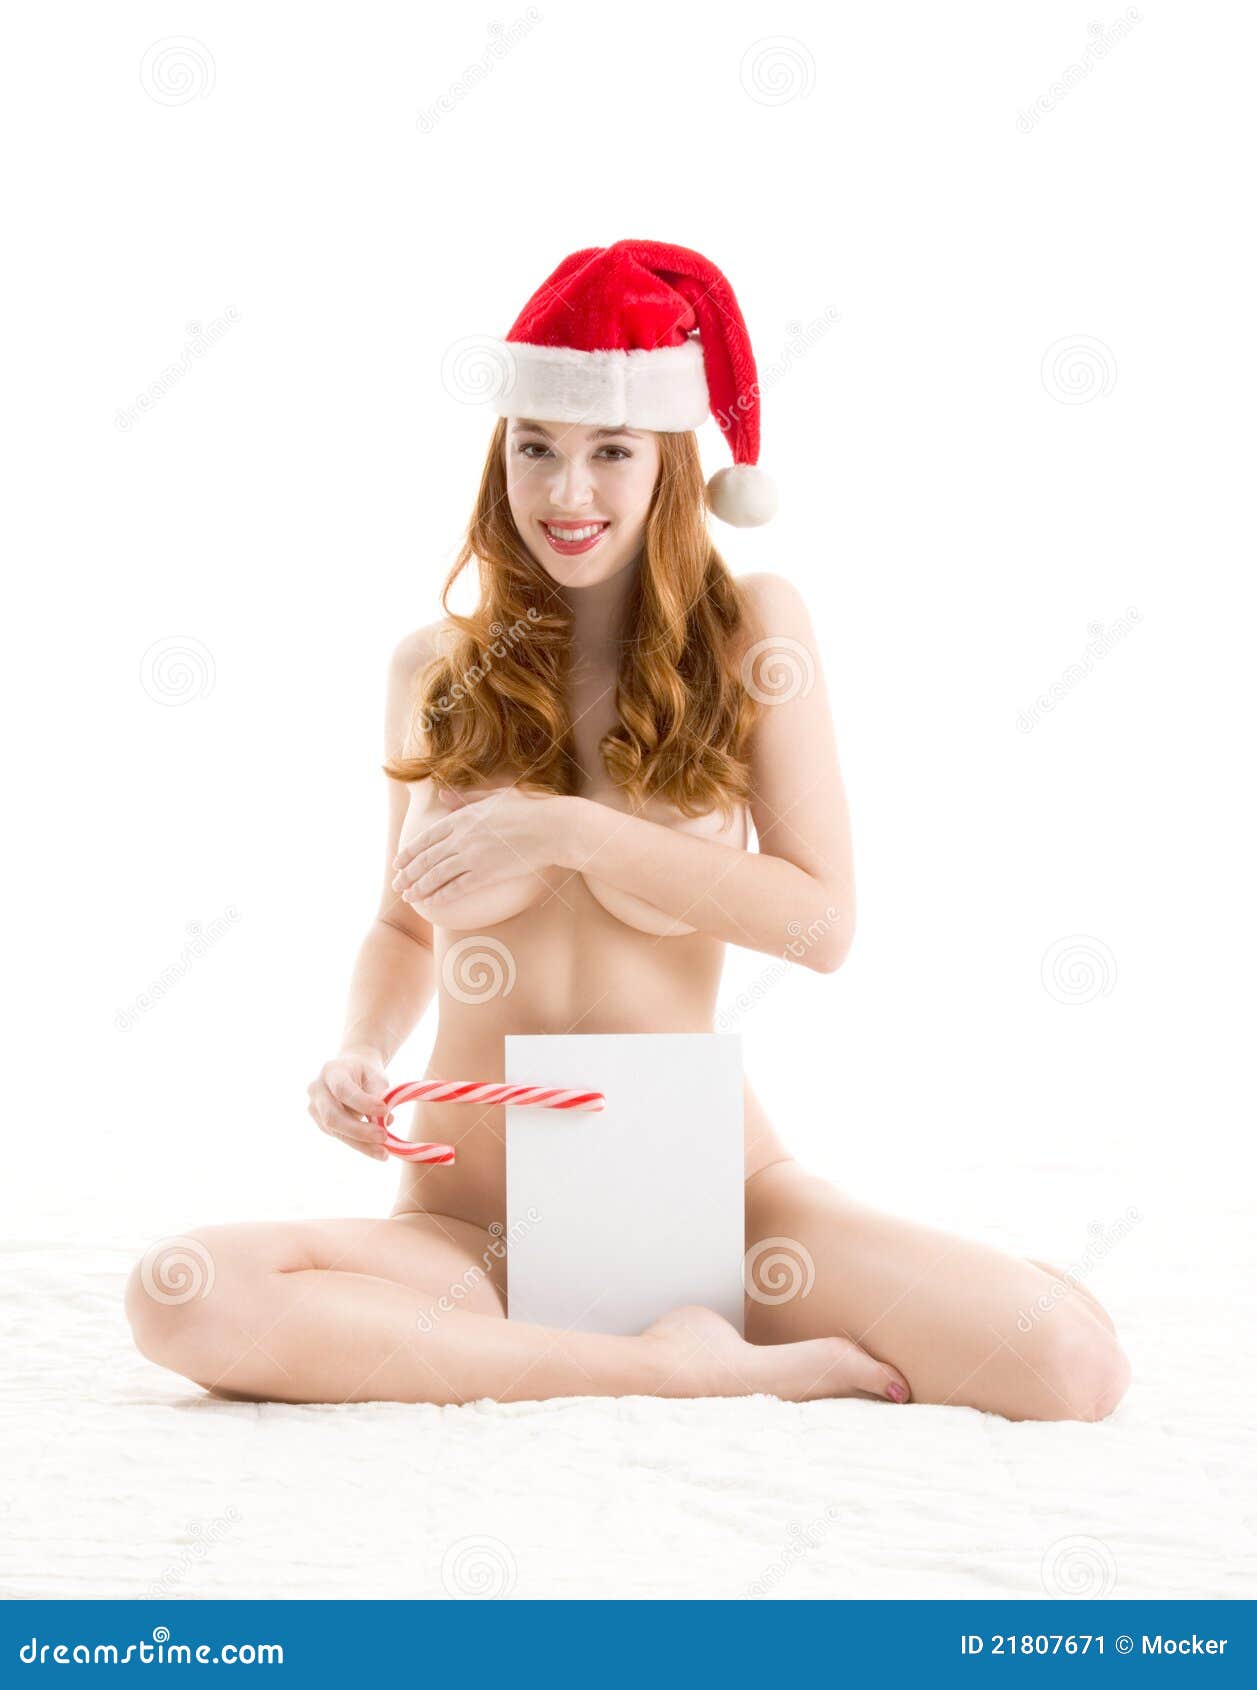 Mrs claus nude